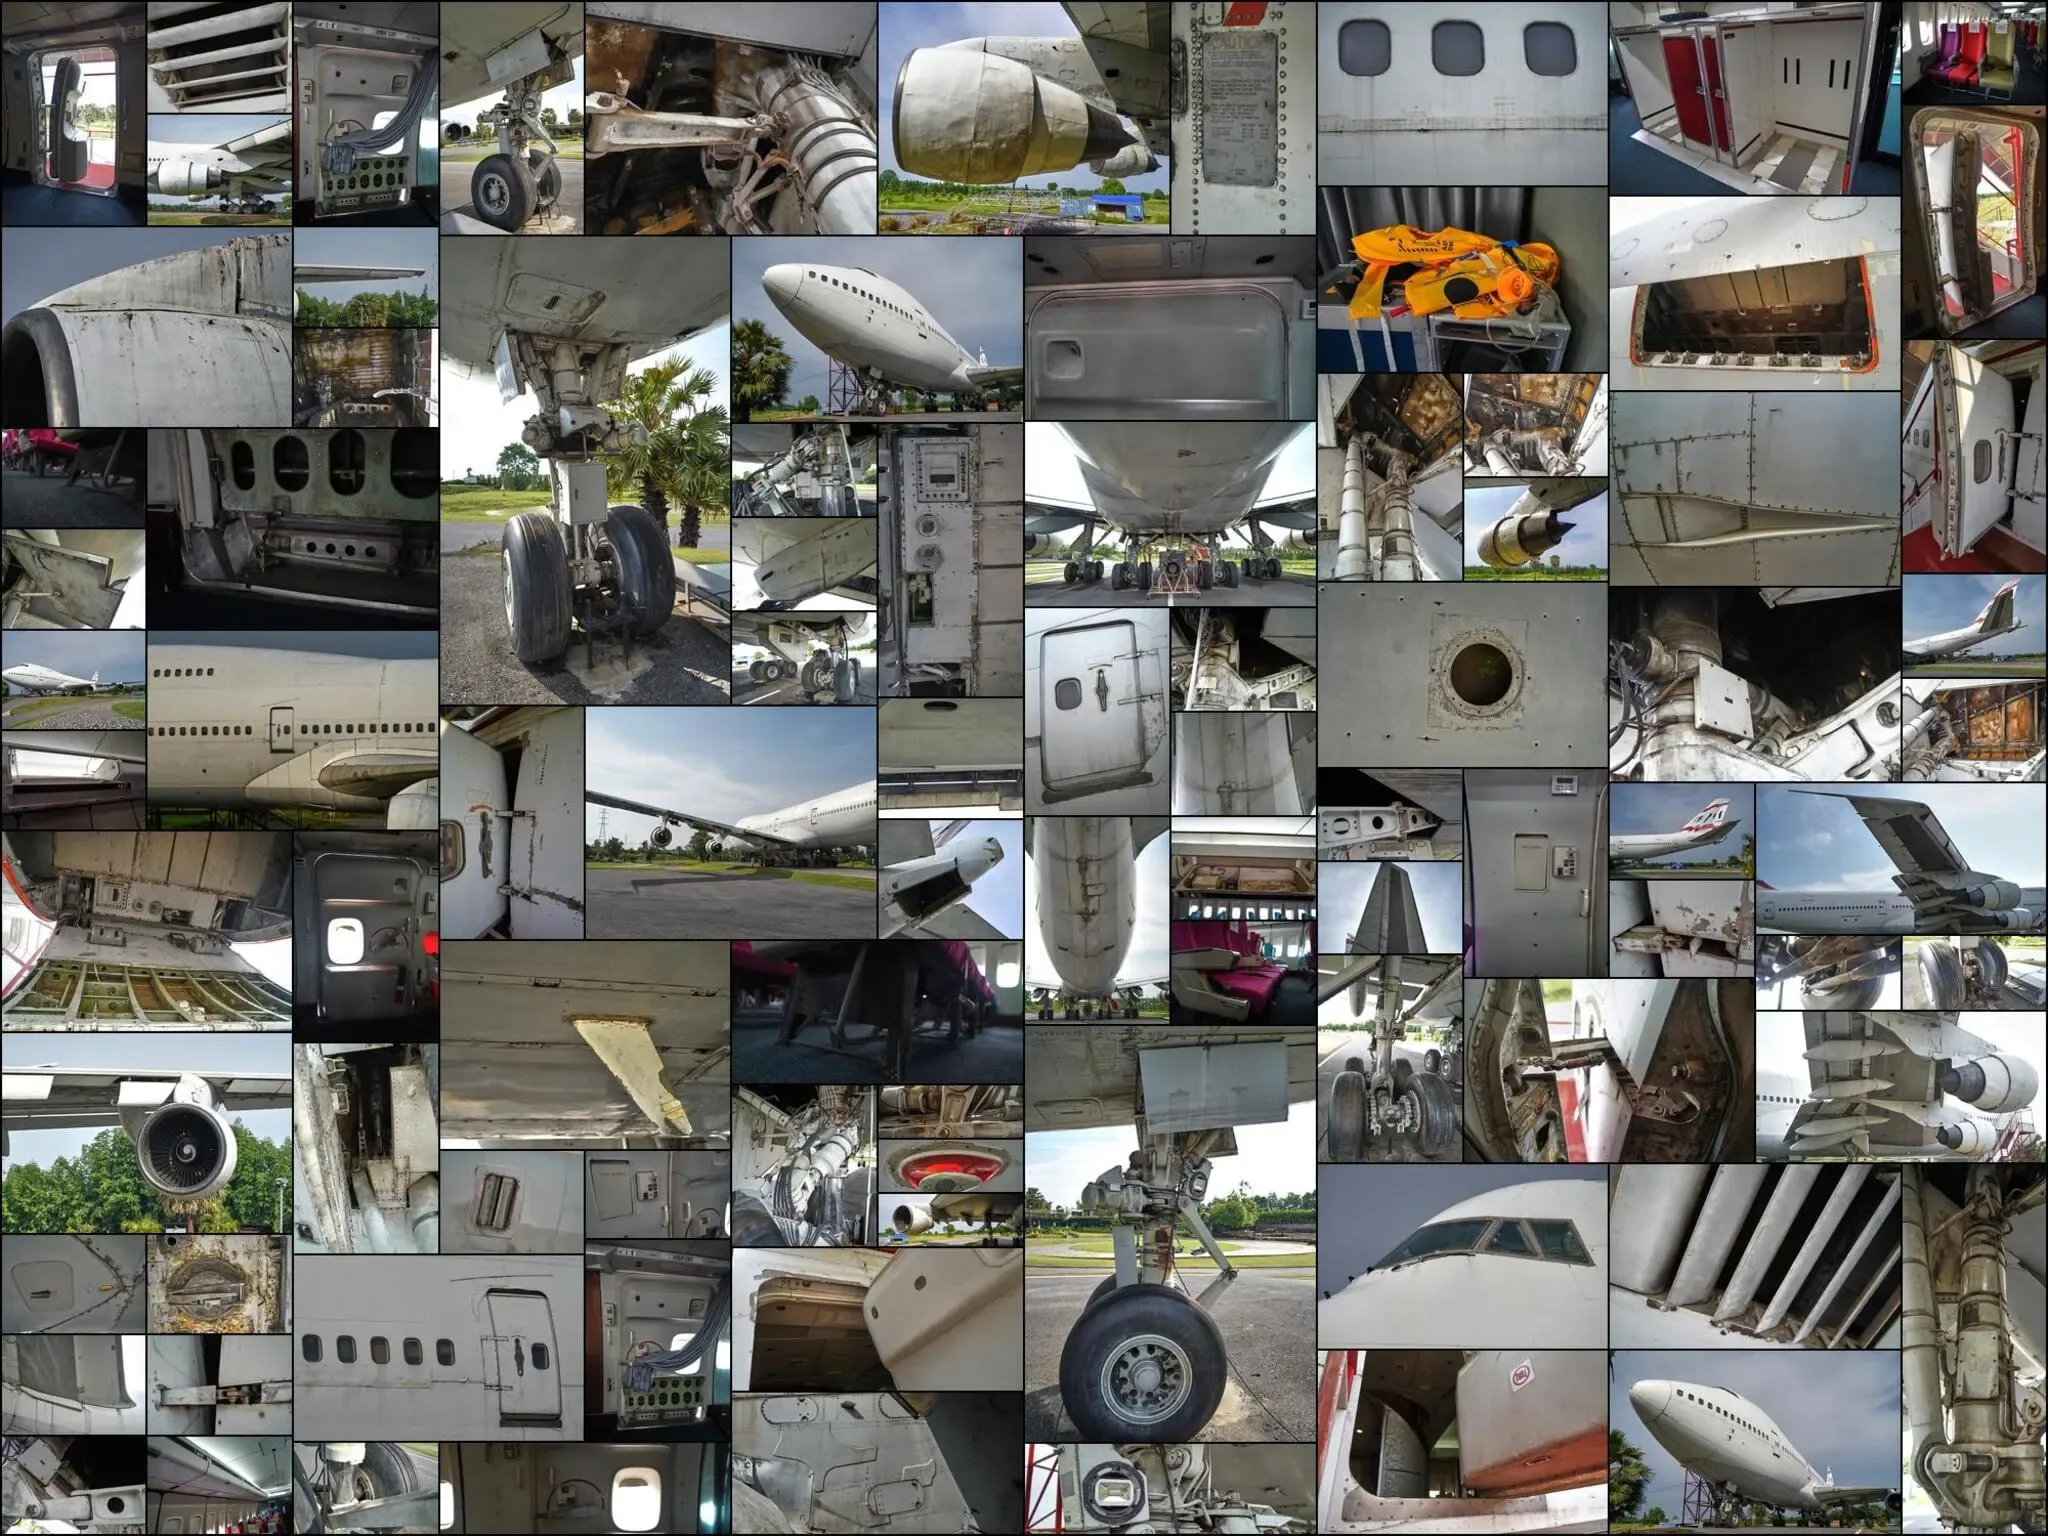 365 photos of Parked Boieng 747